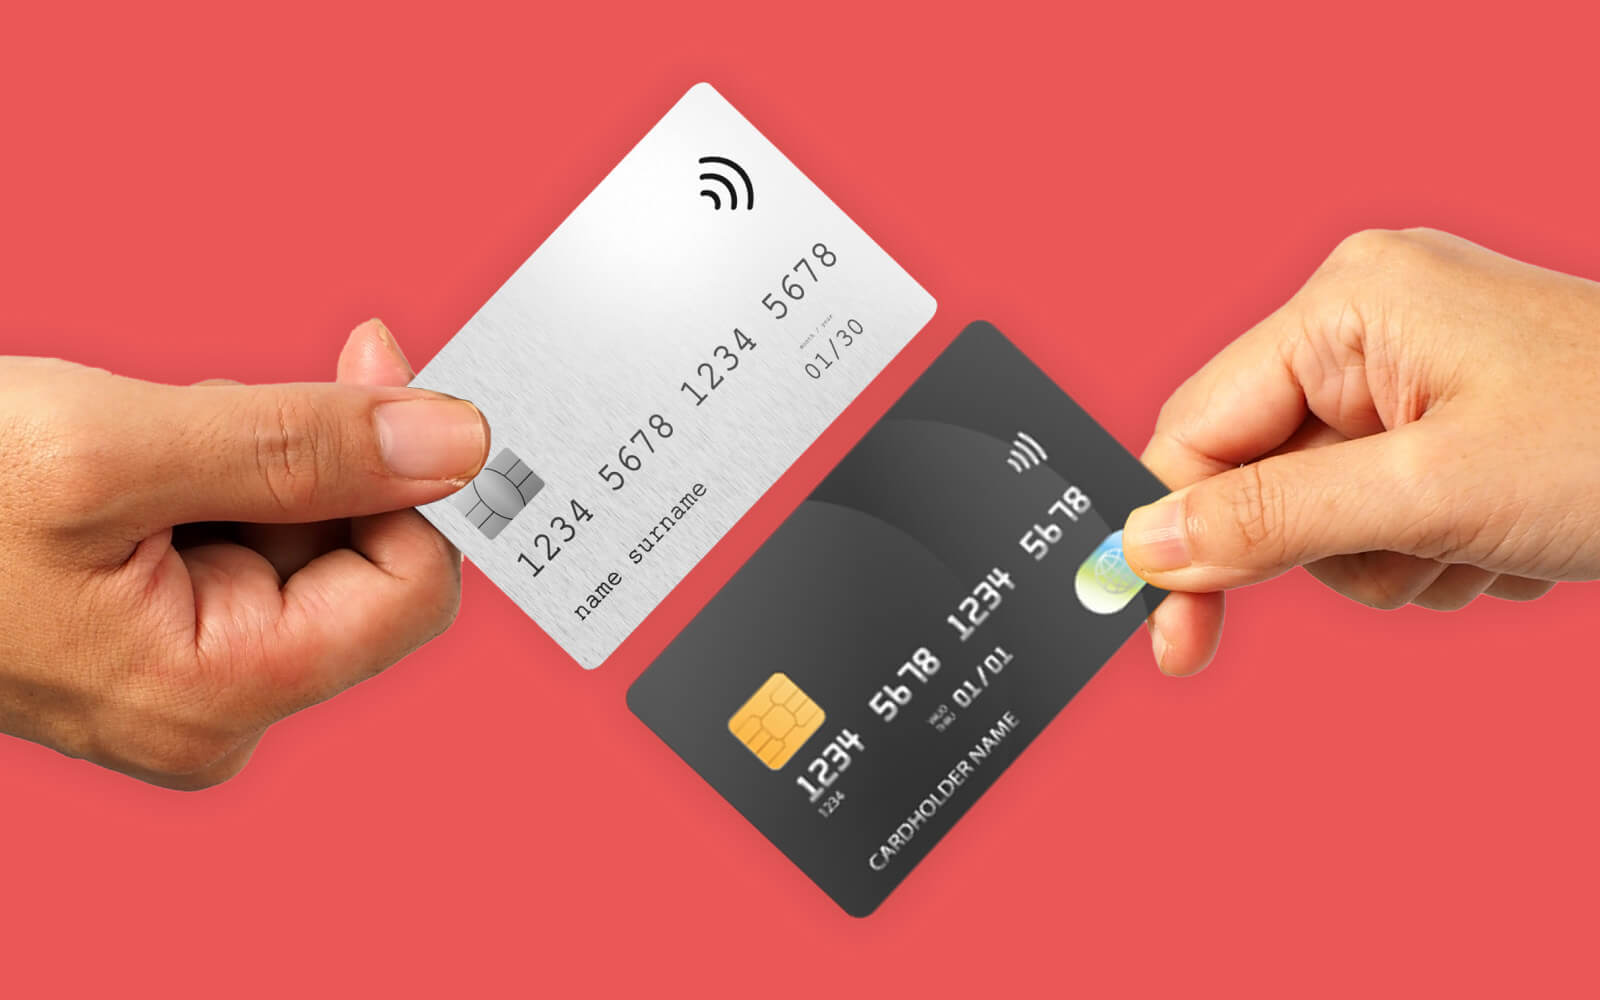 https://paytmblogcdn.paytm.com/wp-content/uploads/2023/06/Blog_Paytm_Metal-Credit-Cards-VS-Plastic-Credit-Cards_-Whats-the-difference.jpg